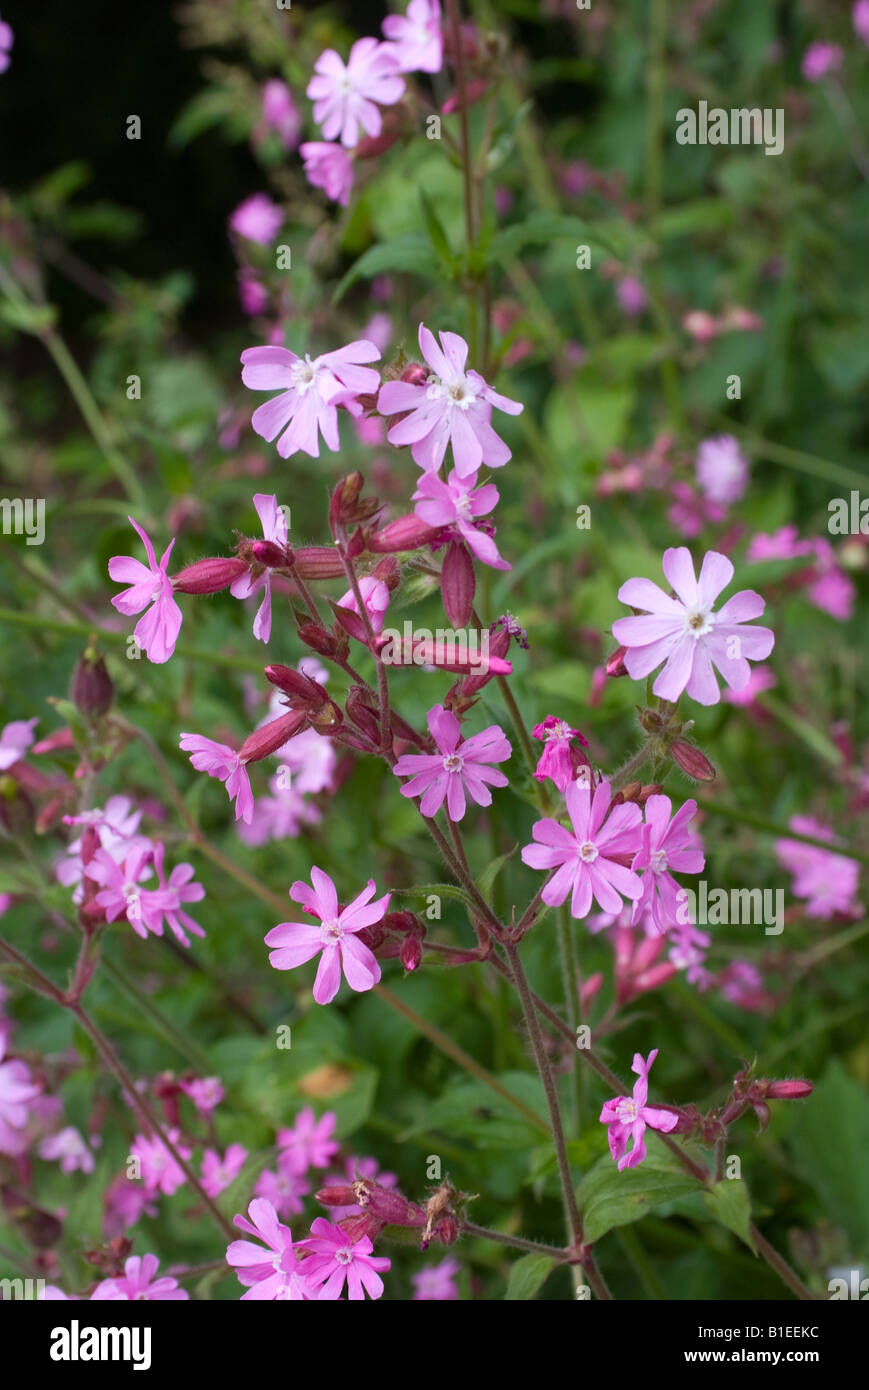 Red Campion Flowers in Meadow in the Cheshire Countryside nglandUnited Kingdom Stock Photo